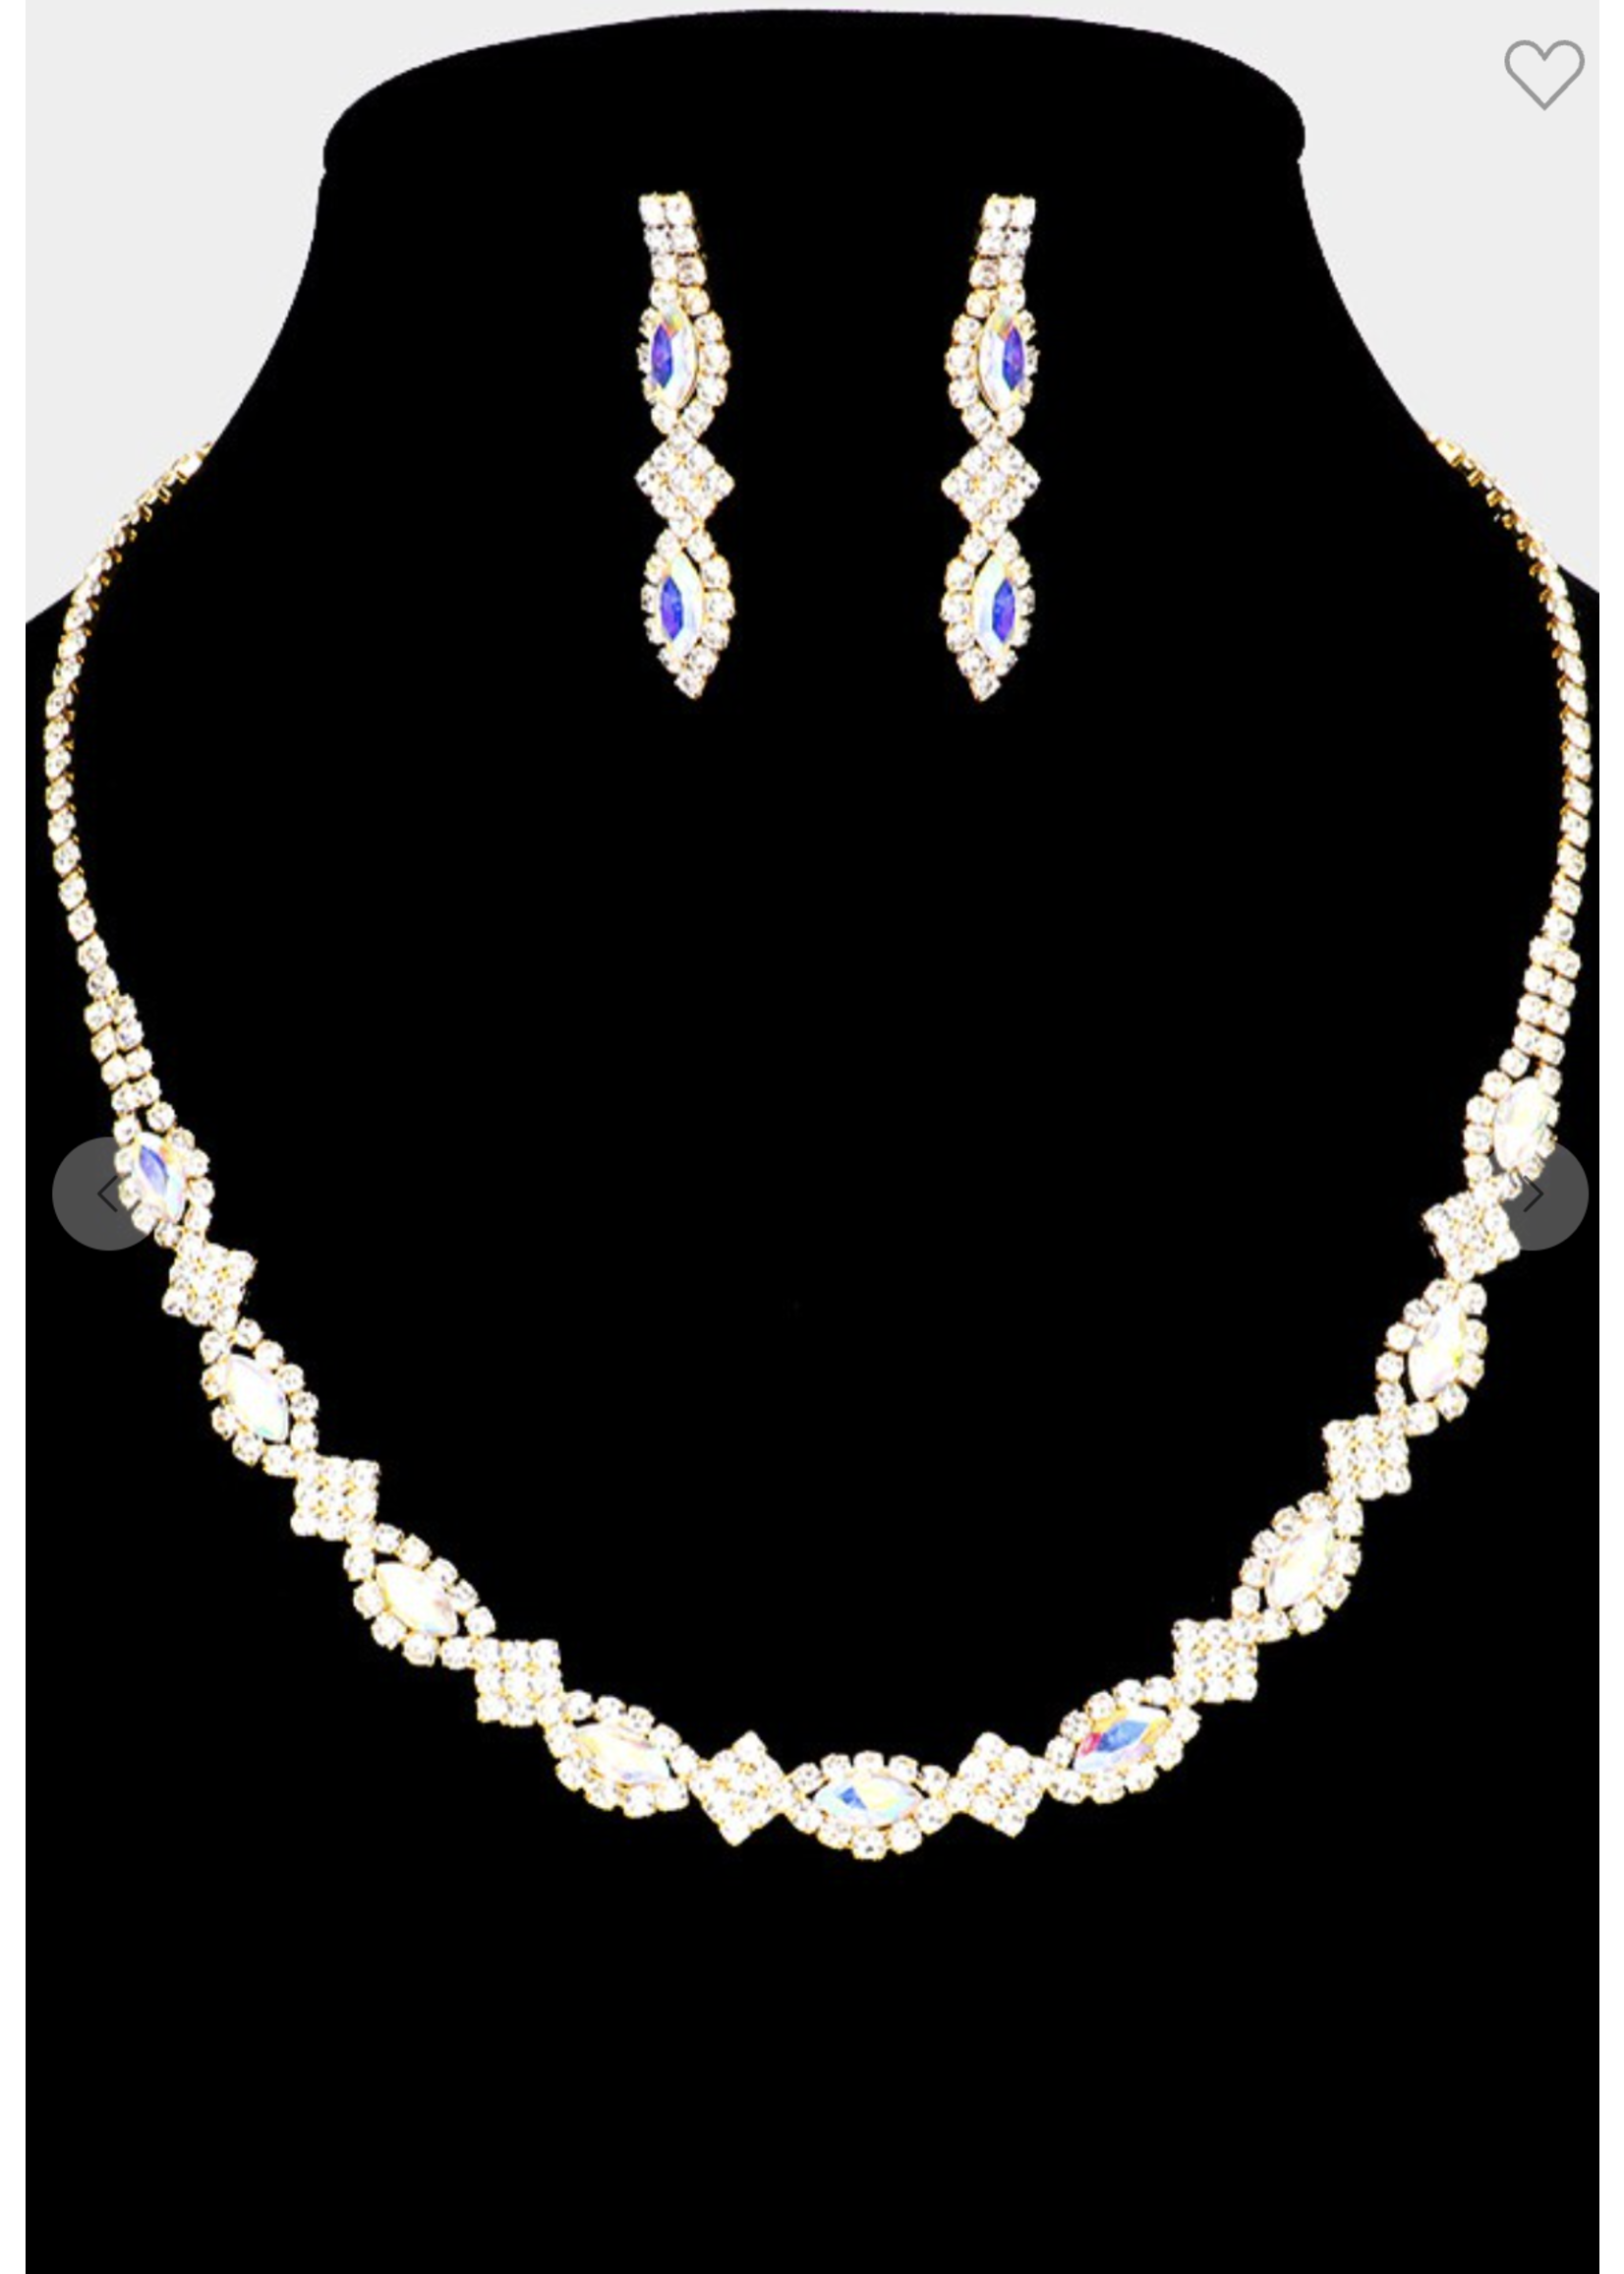 Not Staying Home Tonight Necklace Set